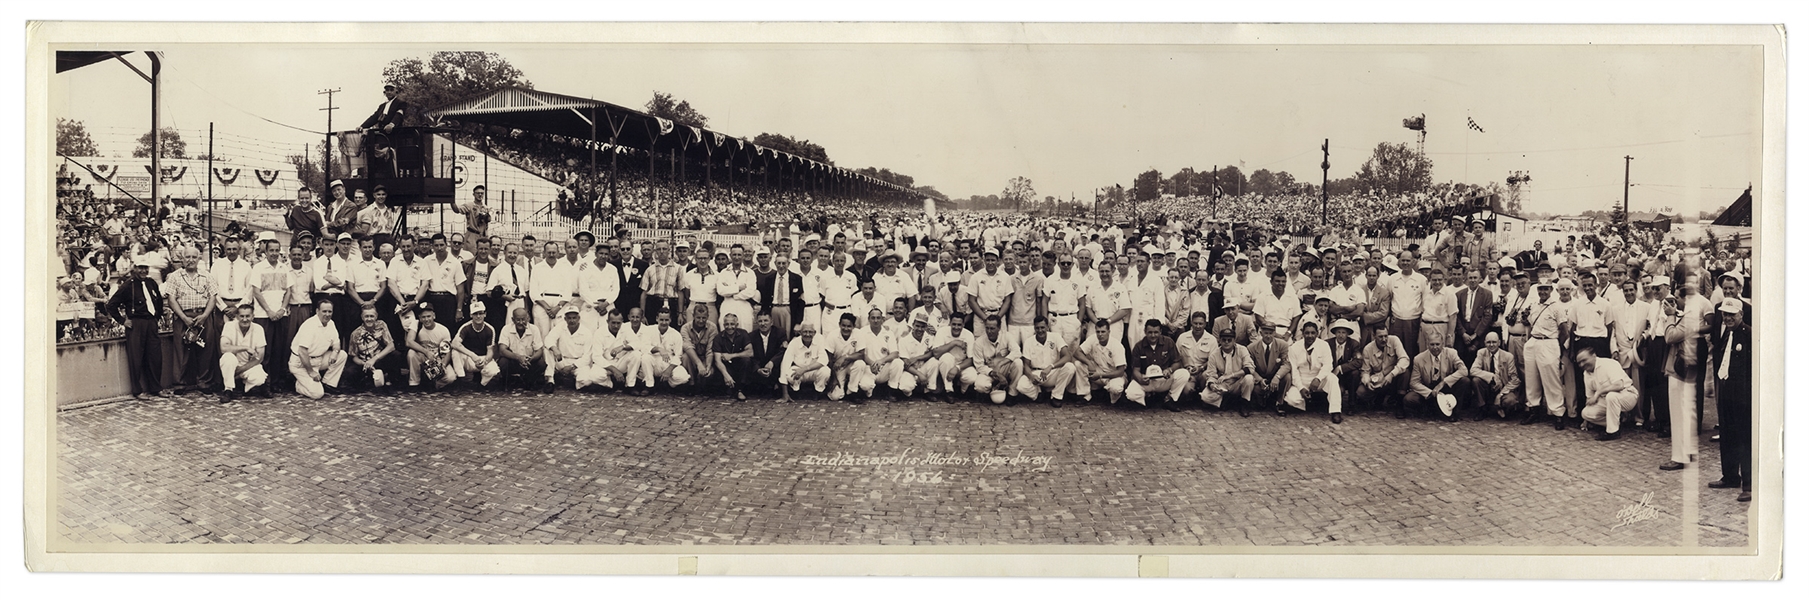 1956 Indy 500 Pre-Race Panoramic Photo